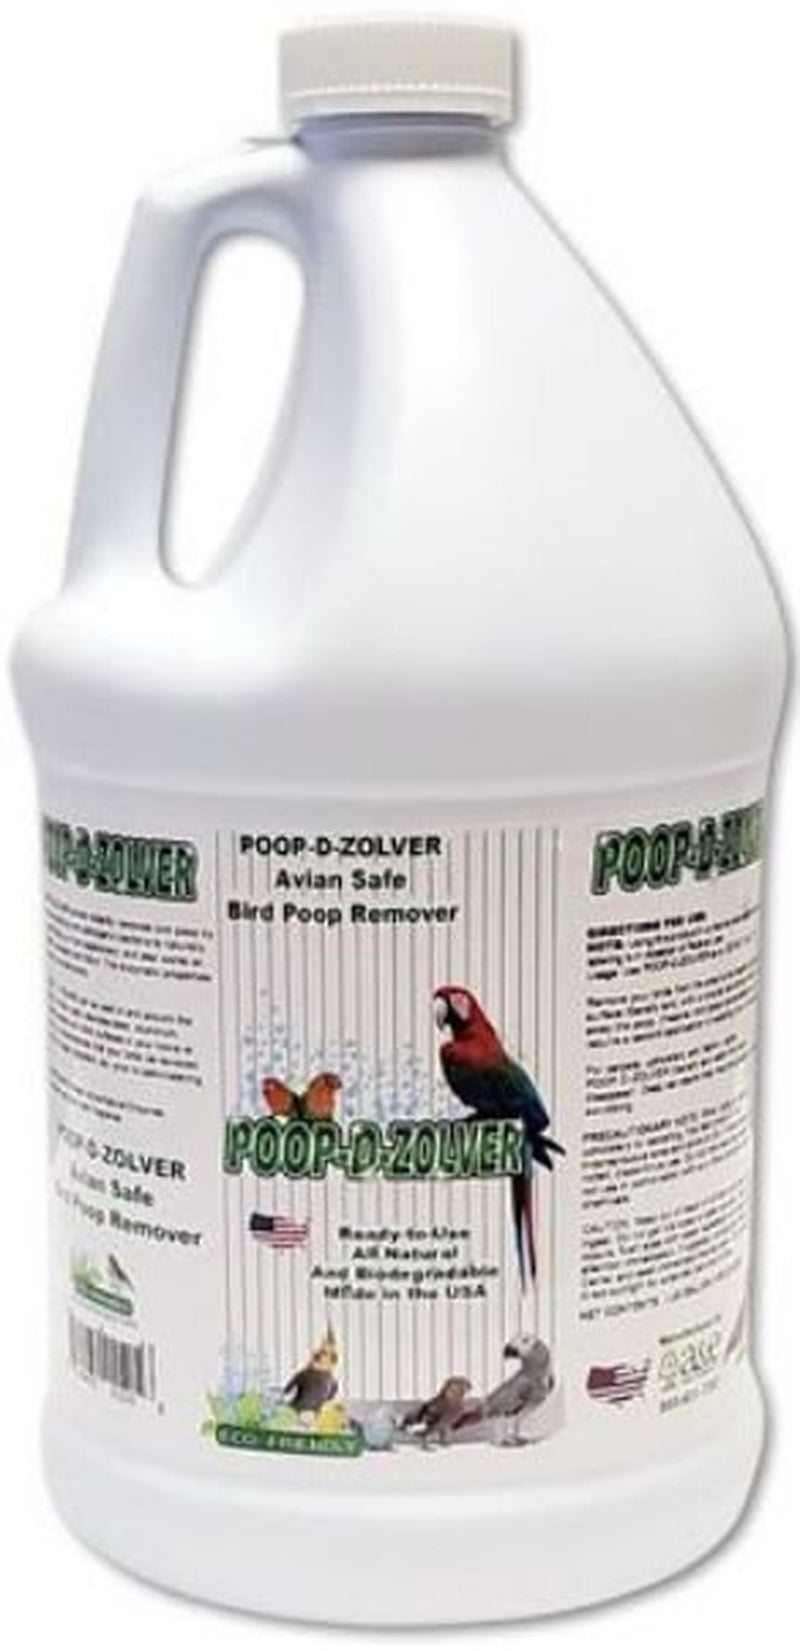 AE Cage Company Poop D Zolver Bird Poop Remover Lime Coconut Scent 1 Gallon Pack of 2